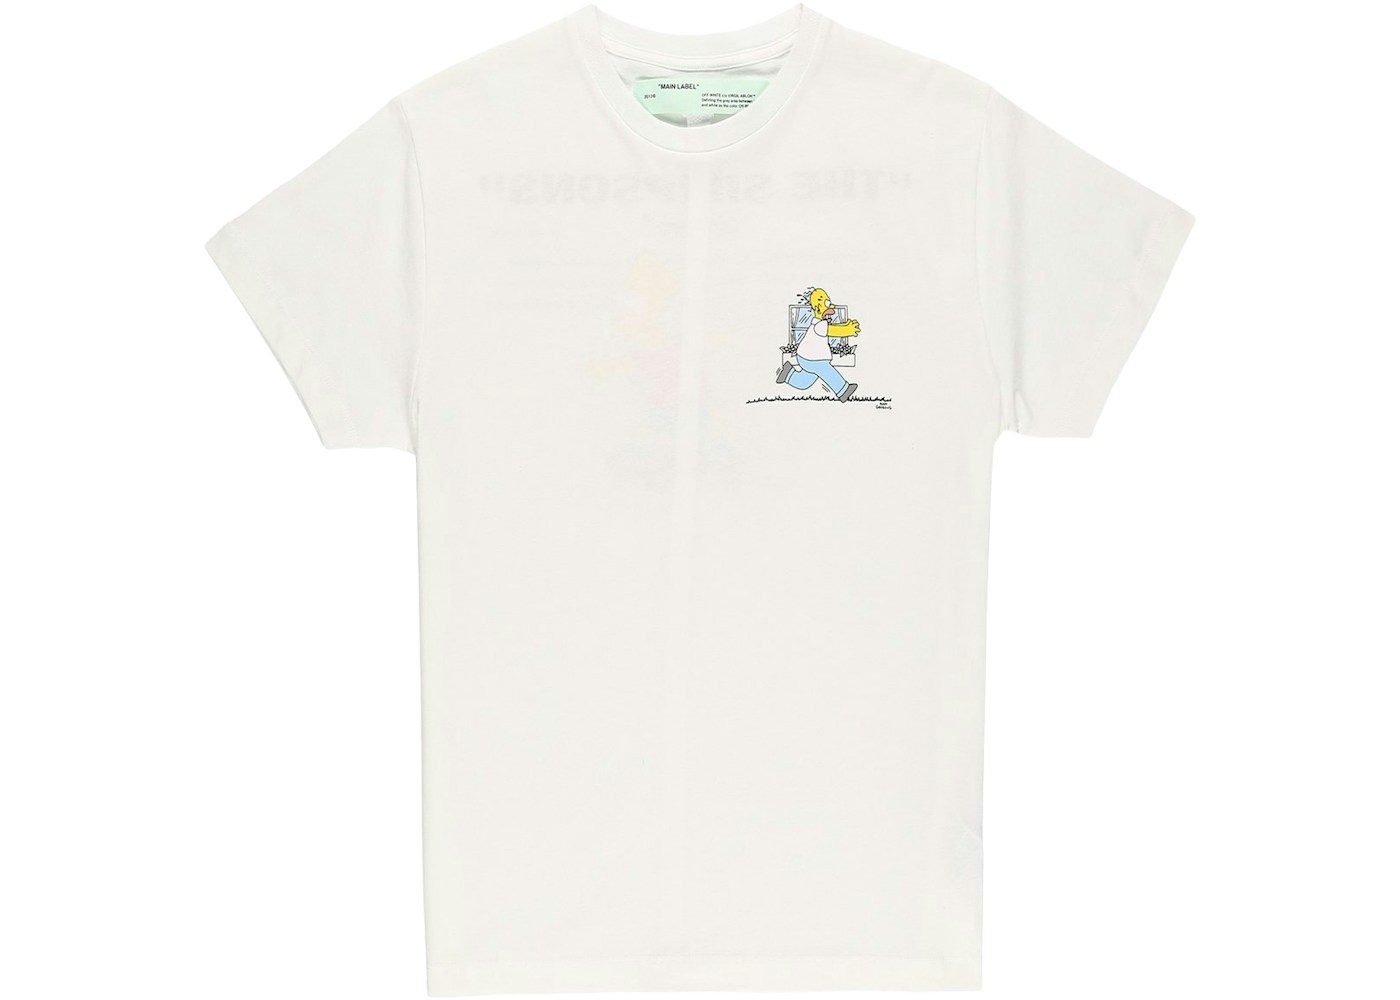 OFF-WHITE Homer and Bart Simpson T-Shirt White/Multicolor - SS19